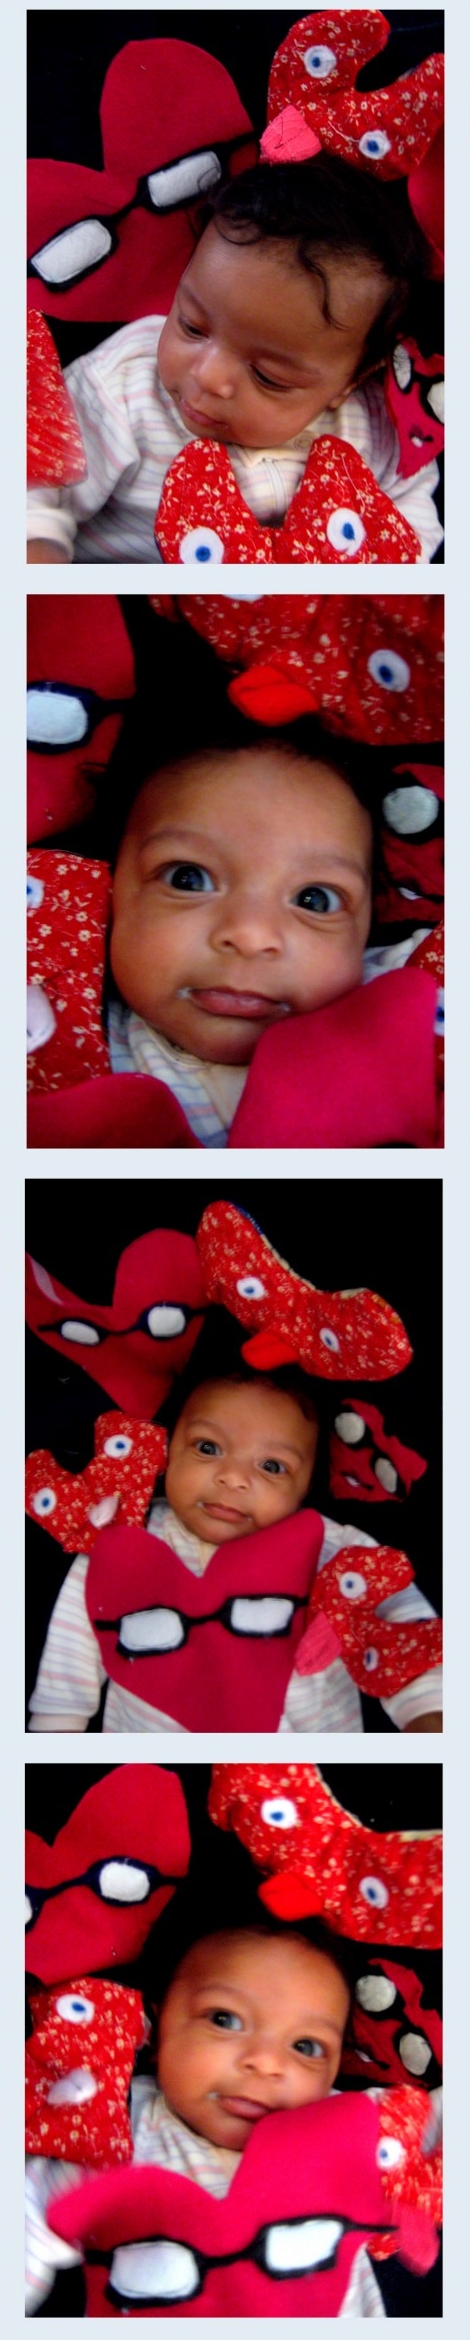 Razblint - Doll - PHoto Booth - Baby and Hearts